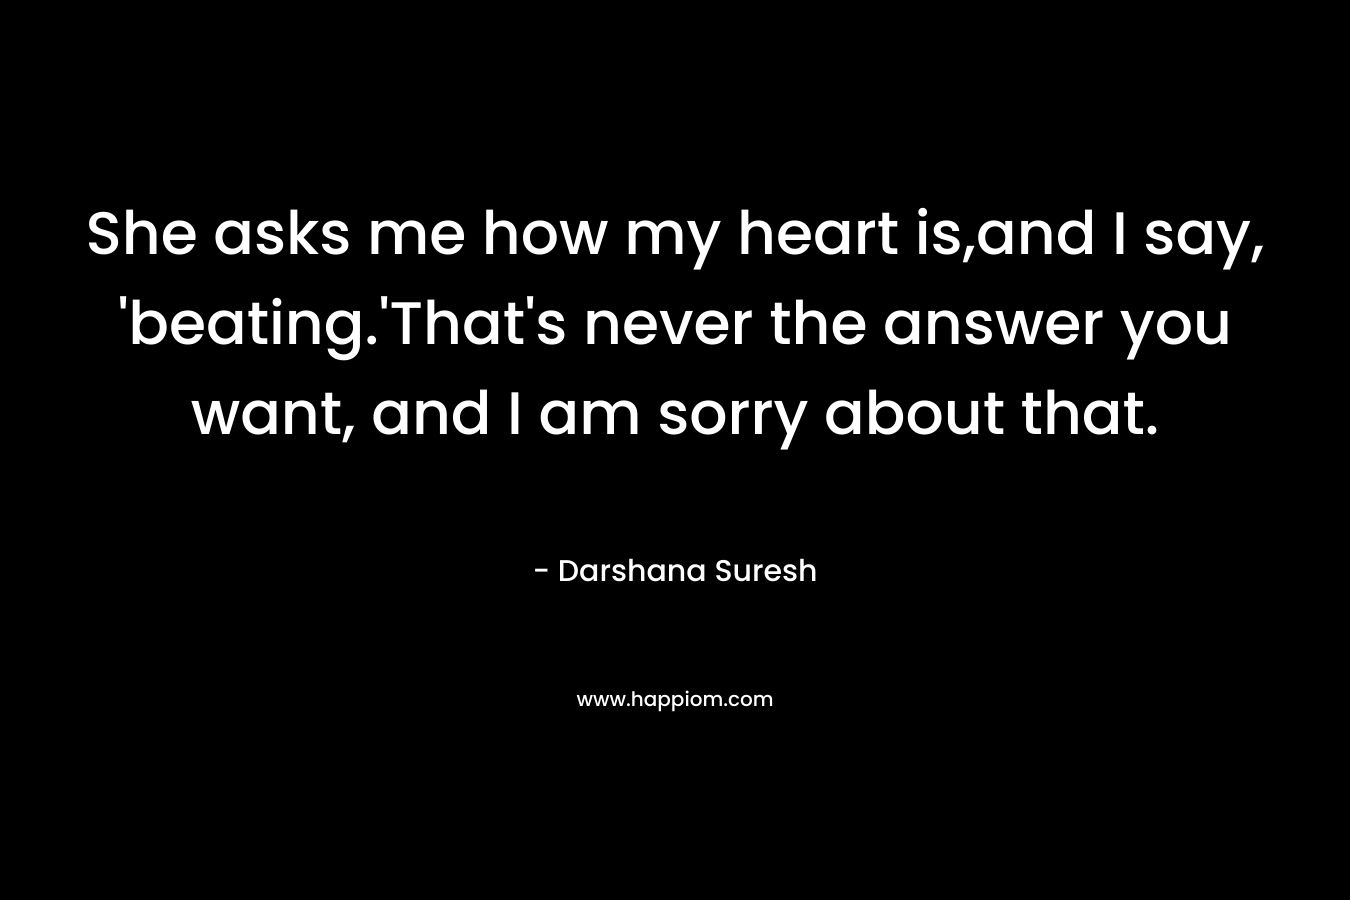 She asks me how my heart is,and I say, ‘beating.’That’s never the answer you want, and I am sorry about that. – Darshana Suresh